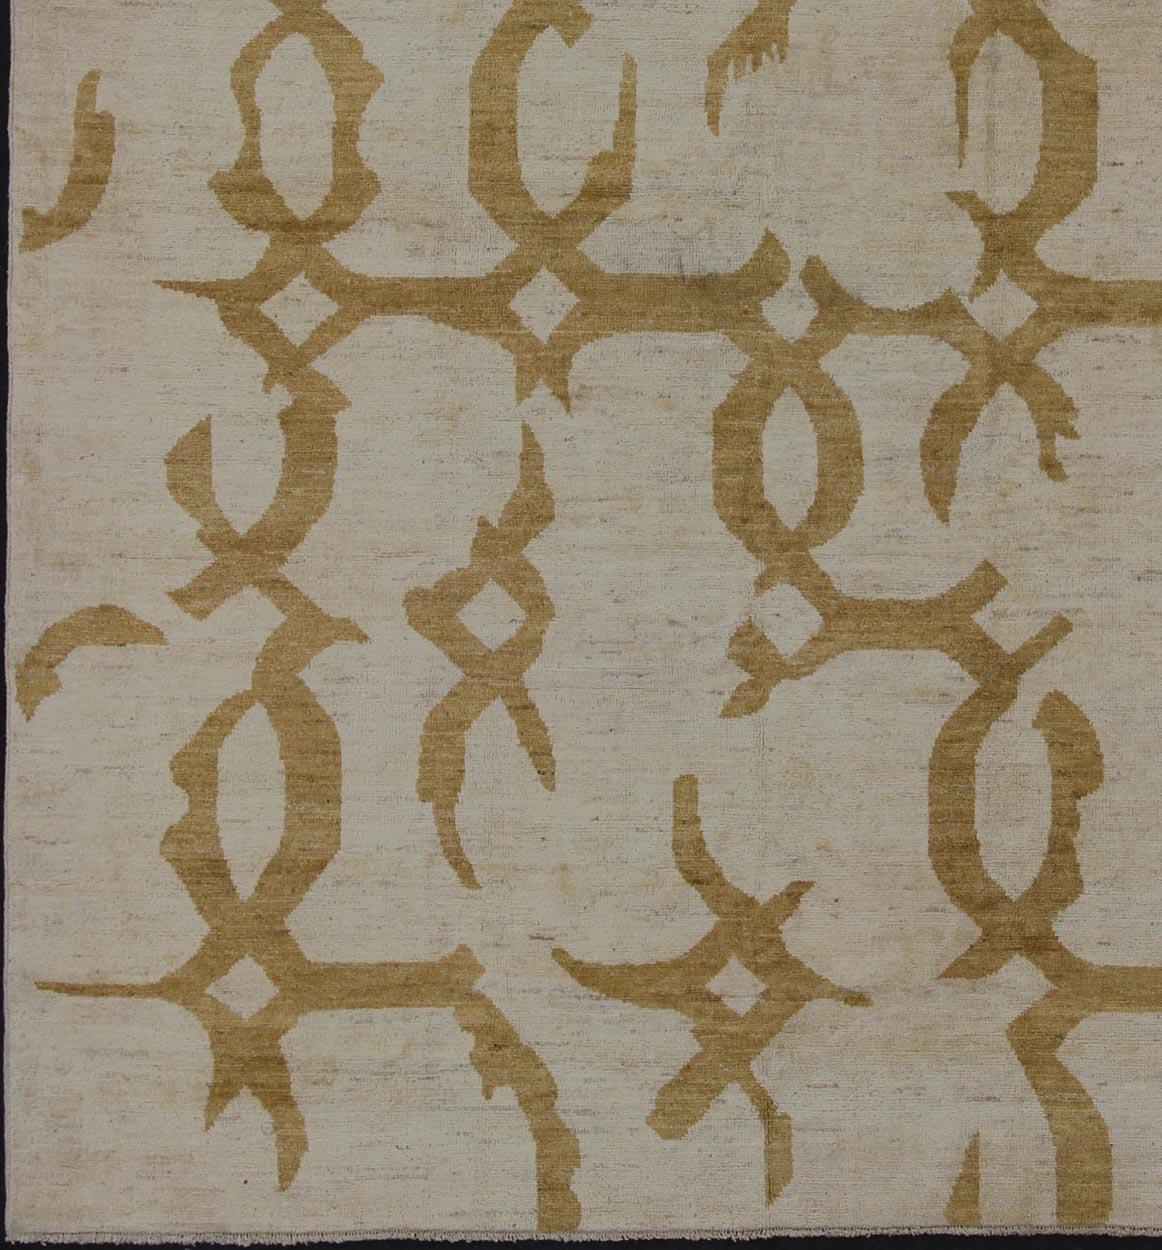 Modern rug Afghan Tribal all-over design, rug 1912-286 country of origin / type: Afghan / Tribal

This tribal Afghan rug with a modern design rendered in a abstract pattern, features a cream background and marigold color in the pattern. This piece